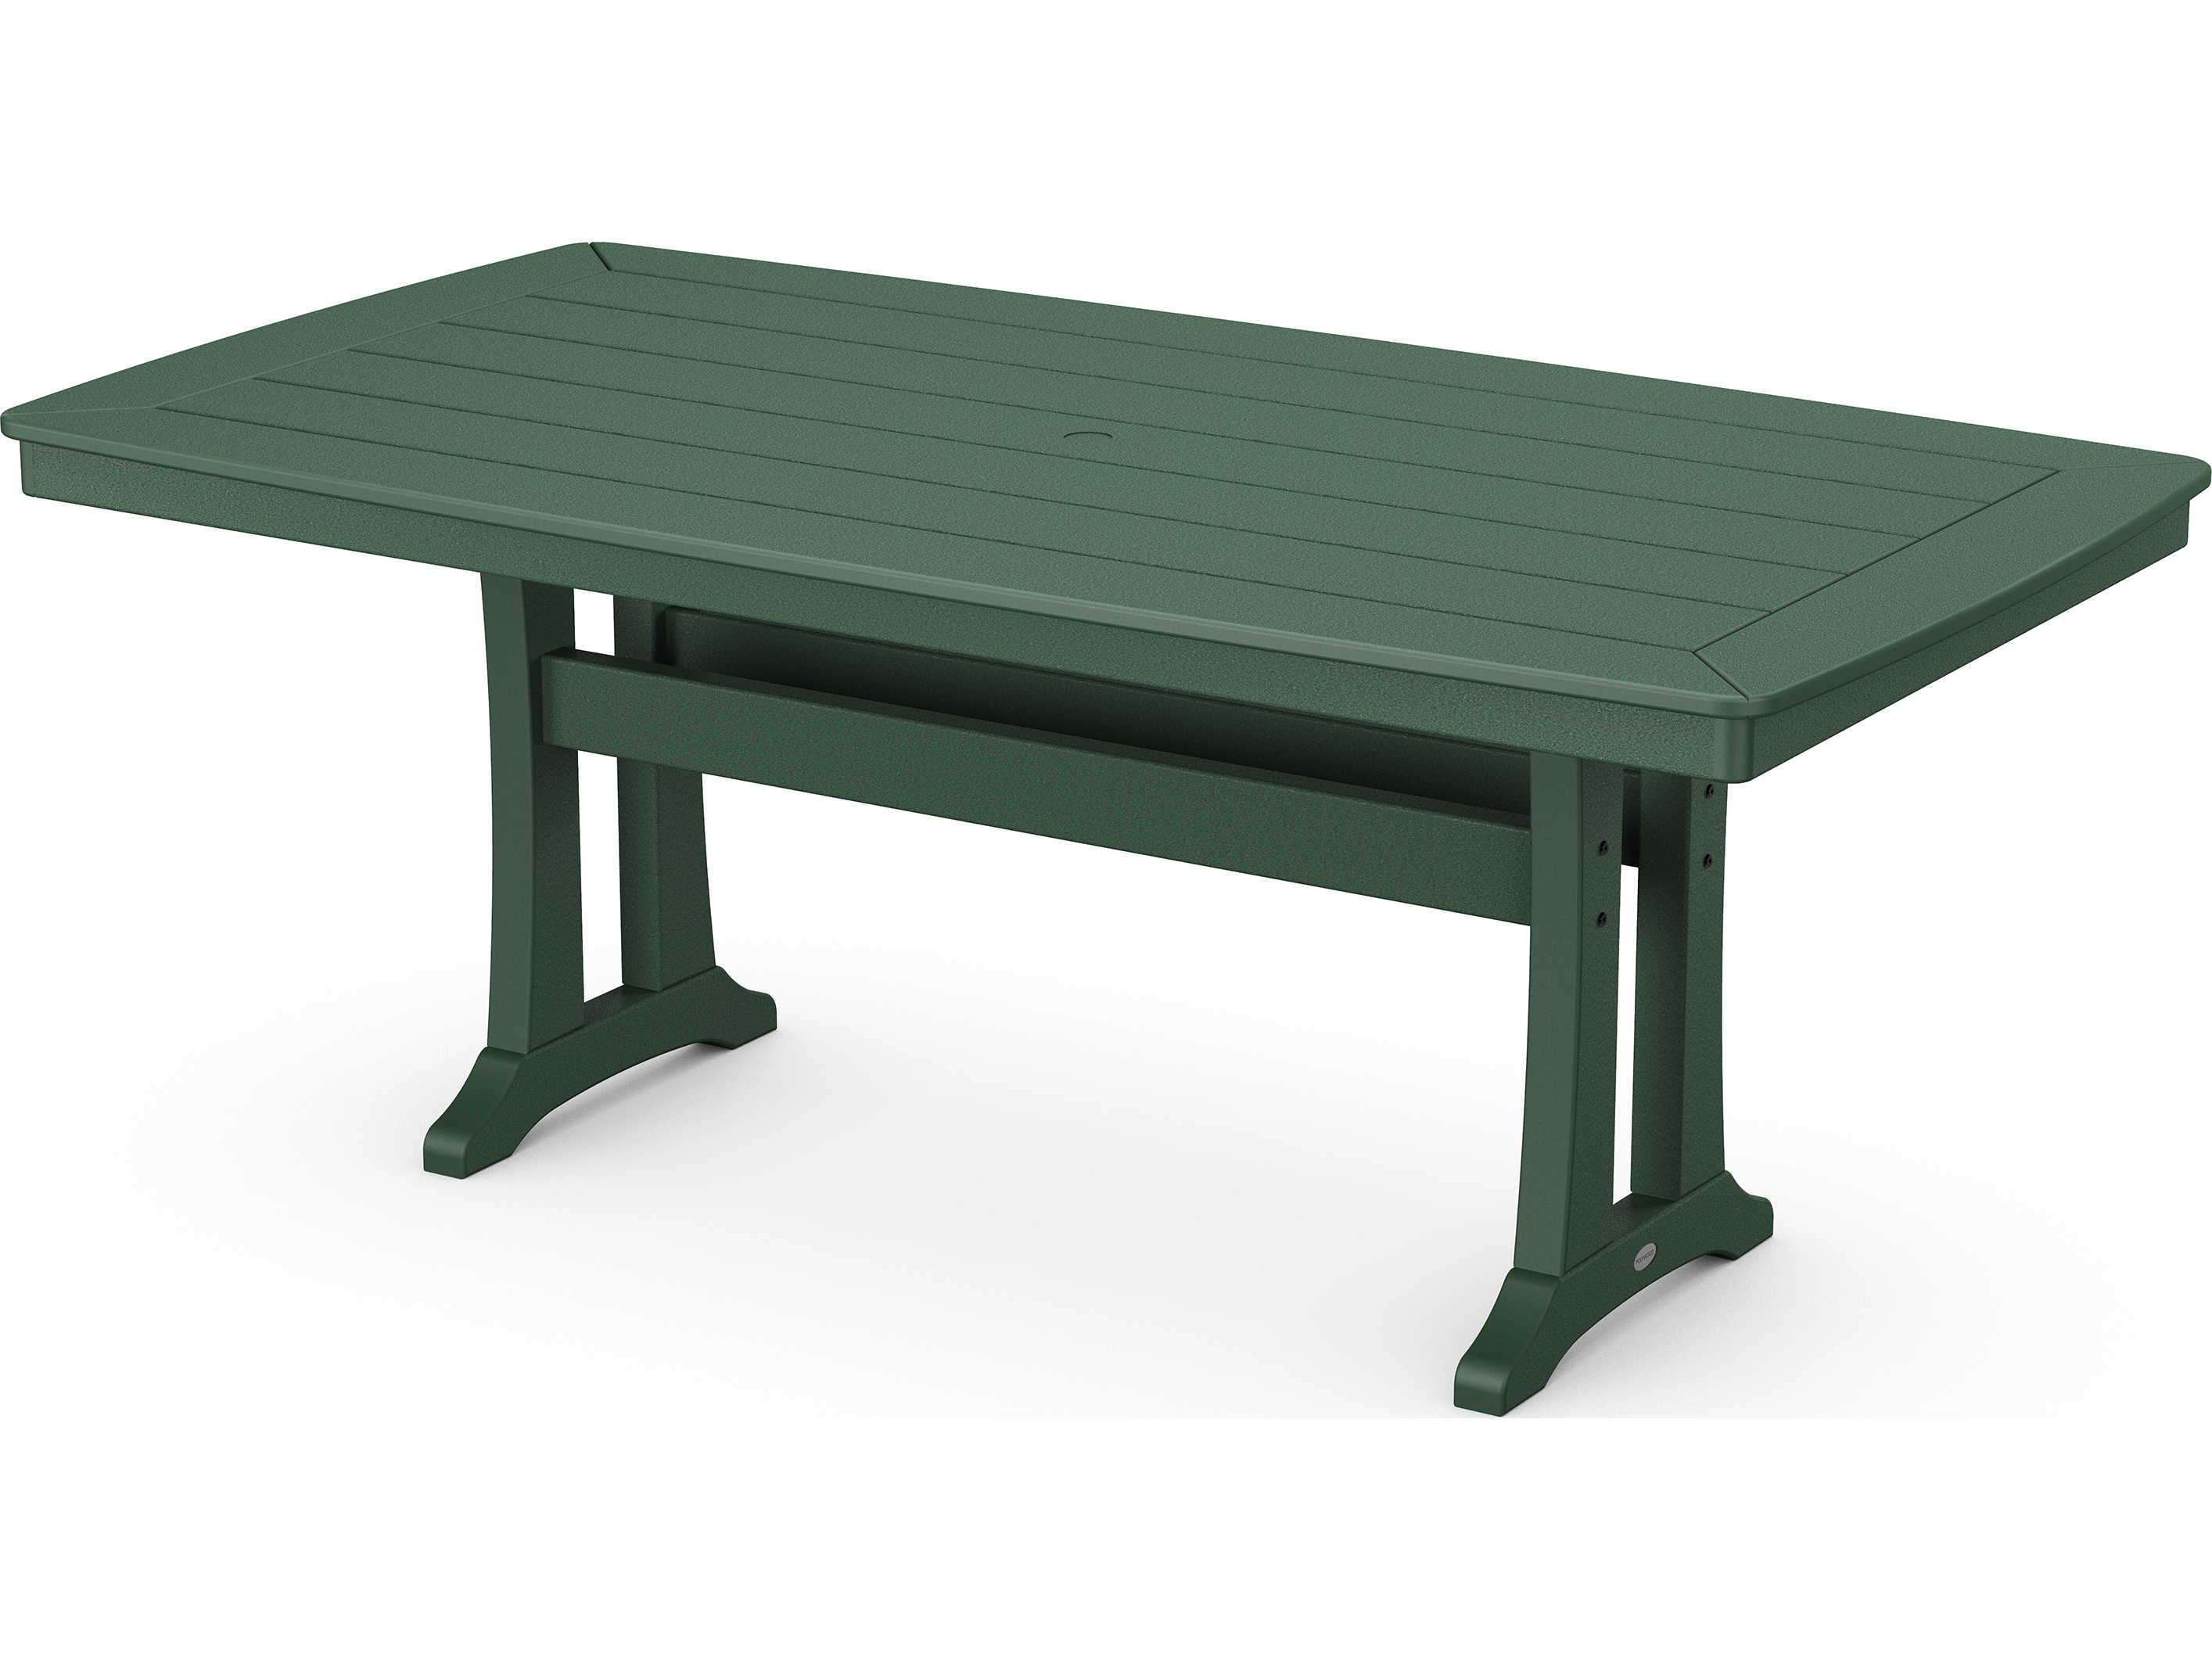 POLYWOOD® Nautical Recycled Plastic 73D x 38W Rectangular Dining Table ...